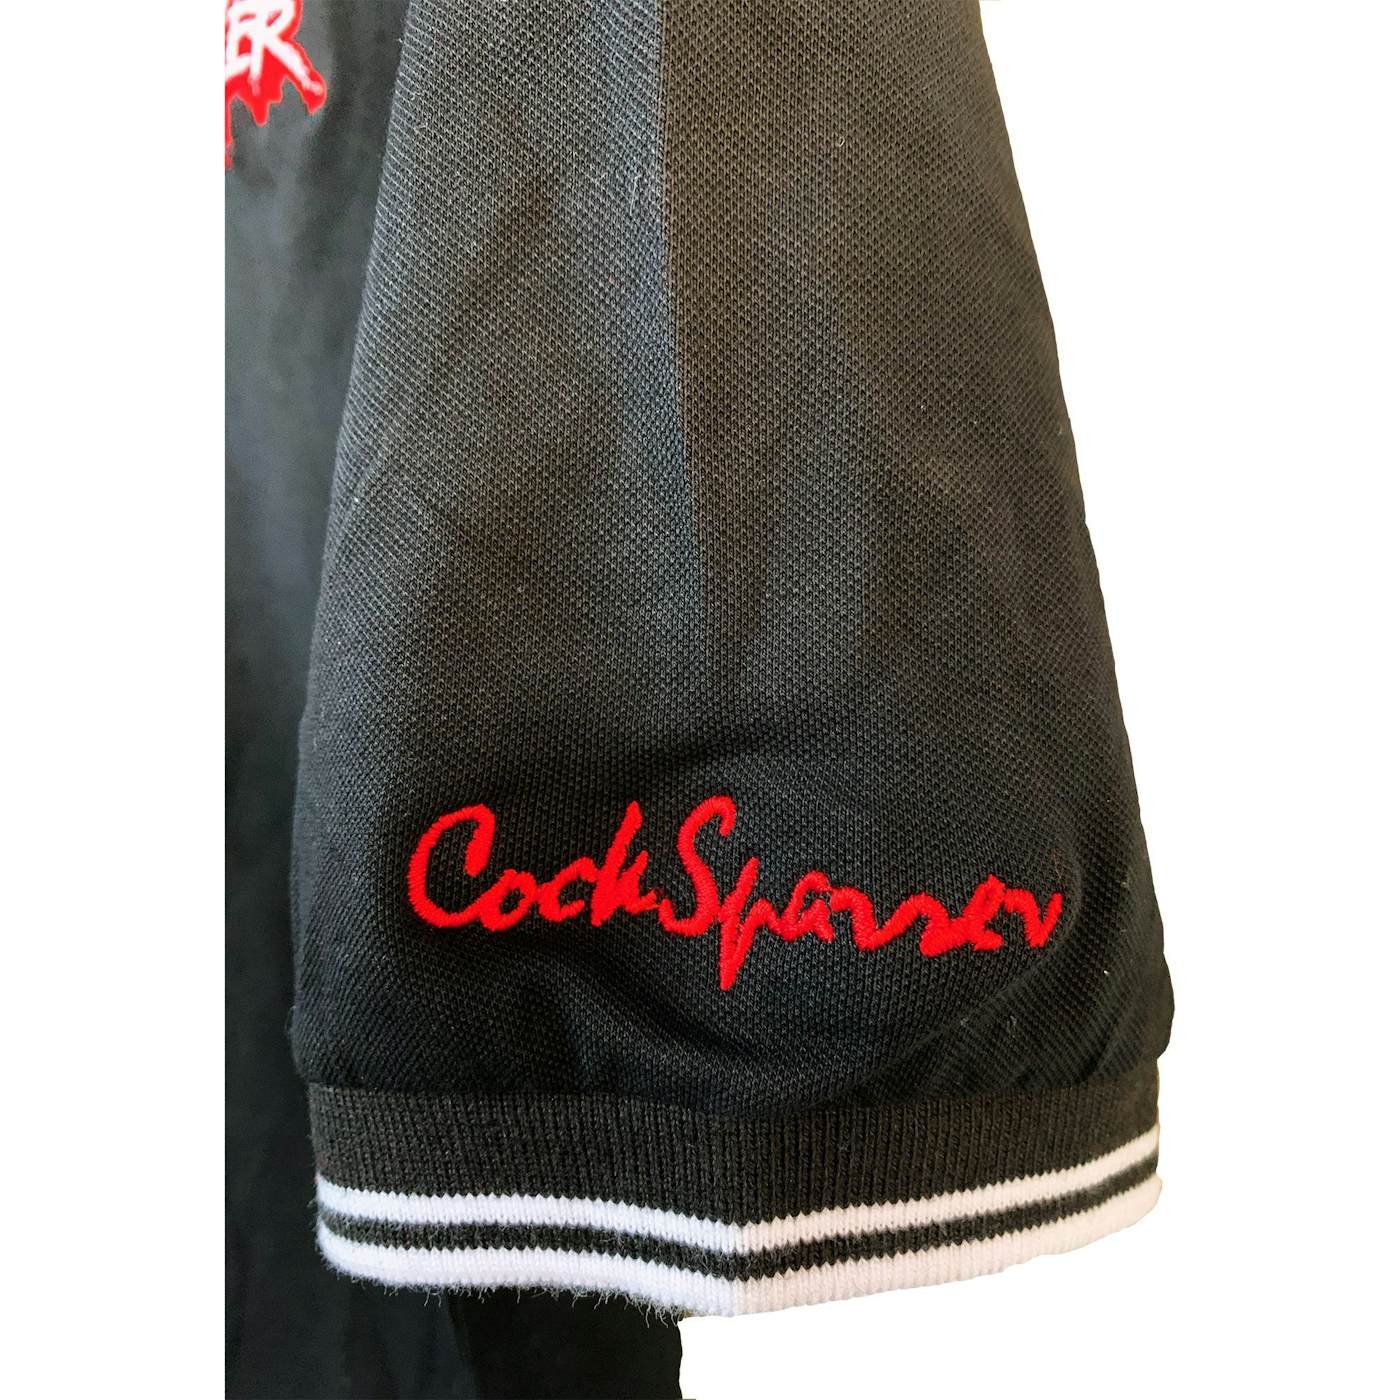 Cock Sparrer - Forever - Black w/ Red Piping - Polo X-Small